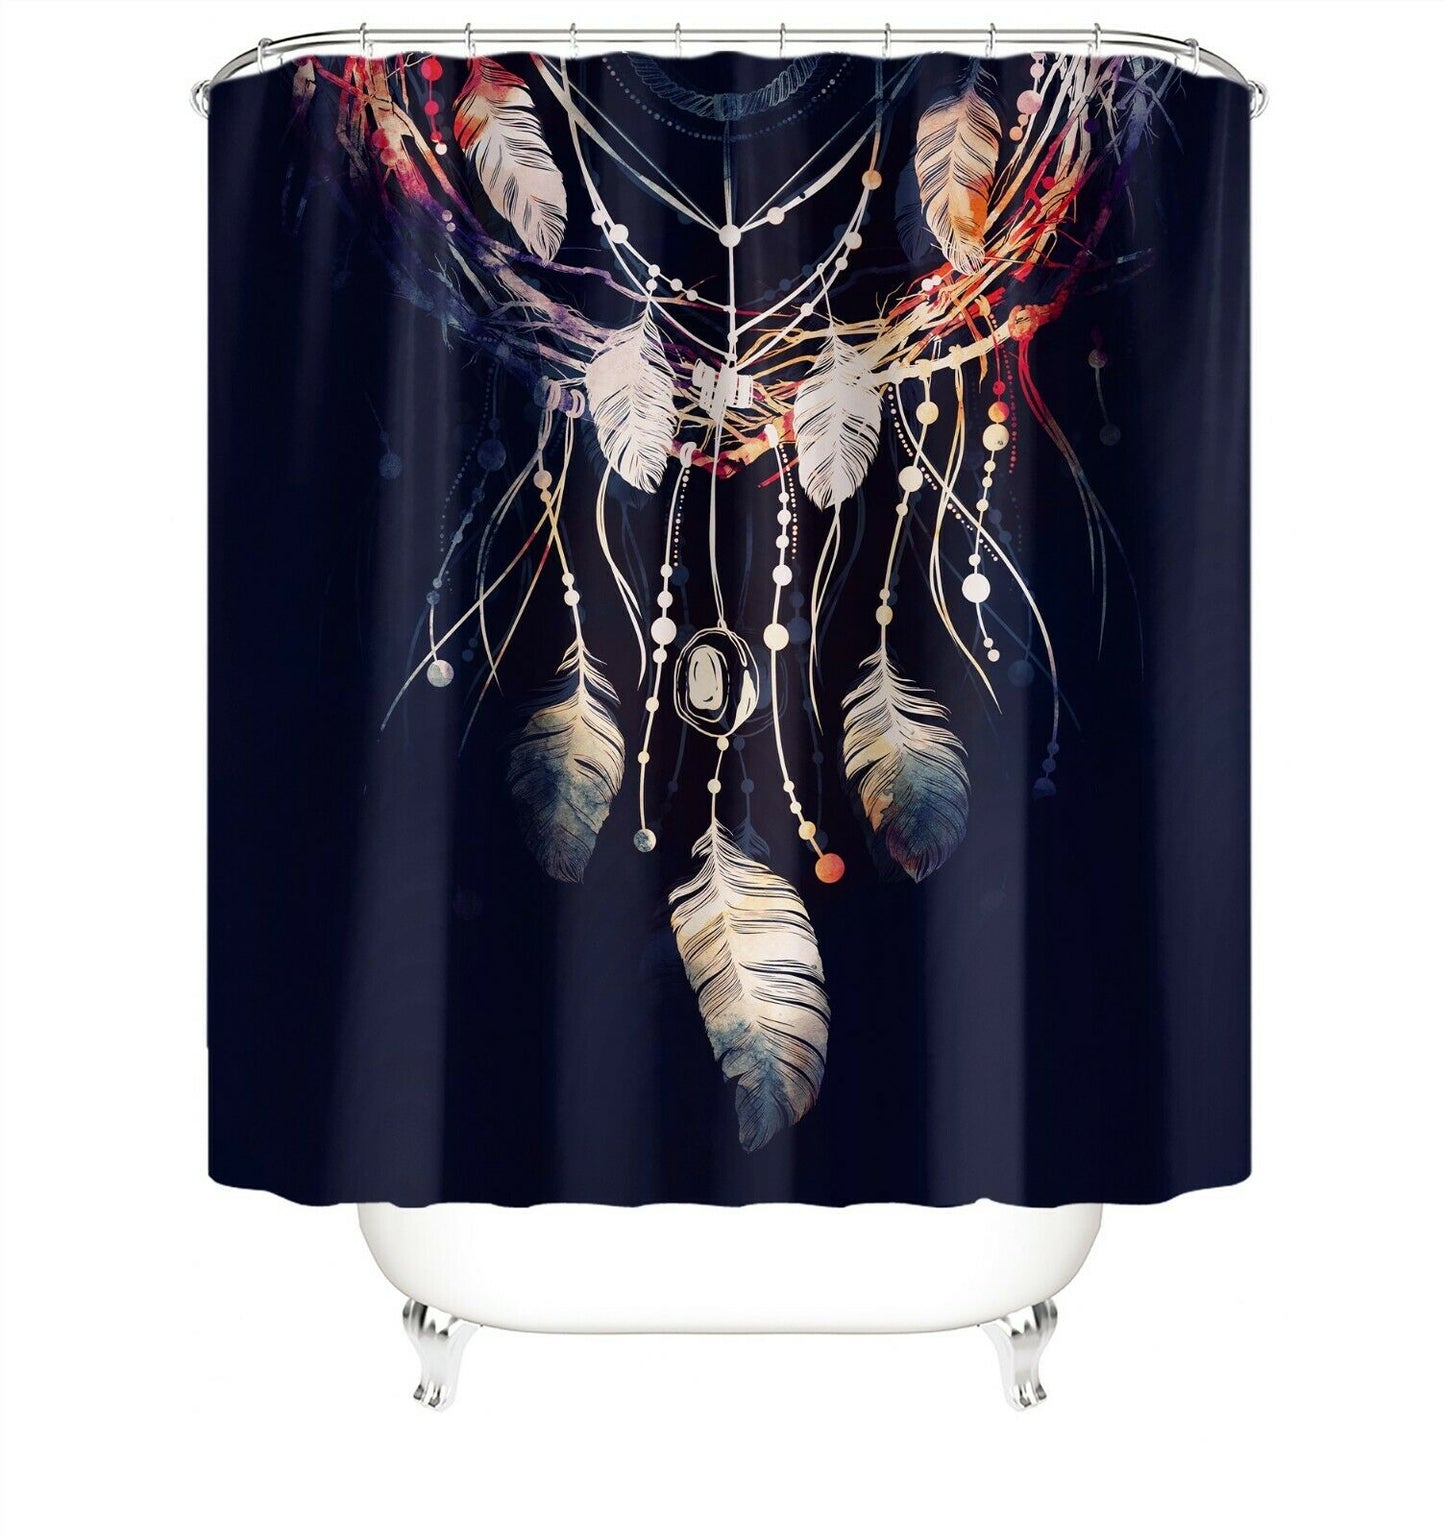 Dreamcatcher Shower Curtain Bathroom Rug Set Bath Mat Non-Slip Toilet Lid Cover-180×180cm Shower Curtain Only-Free Shipping at meselling99